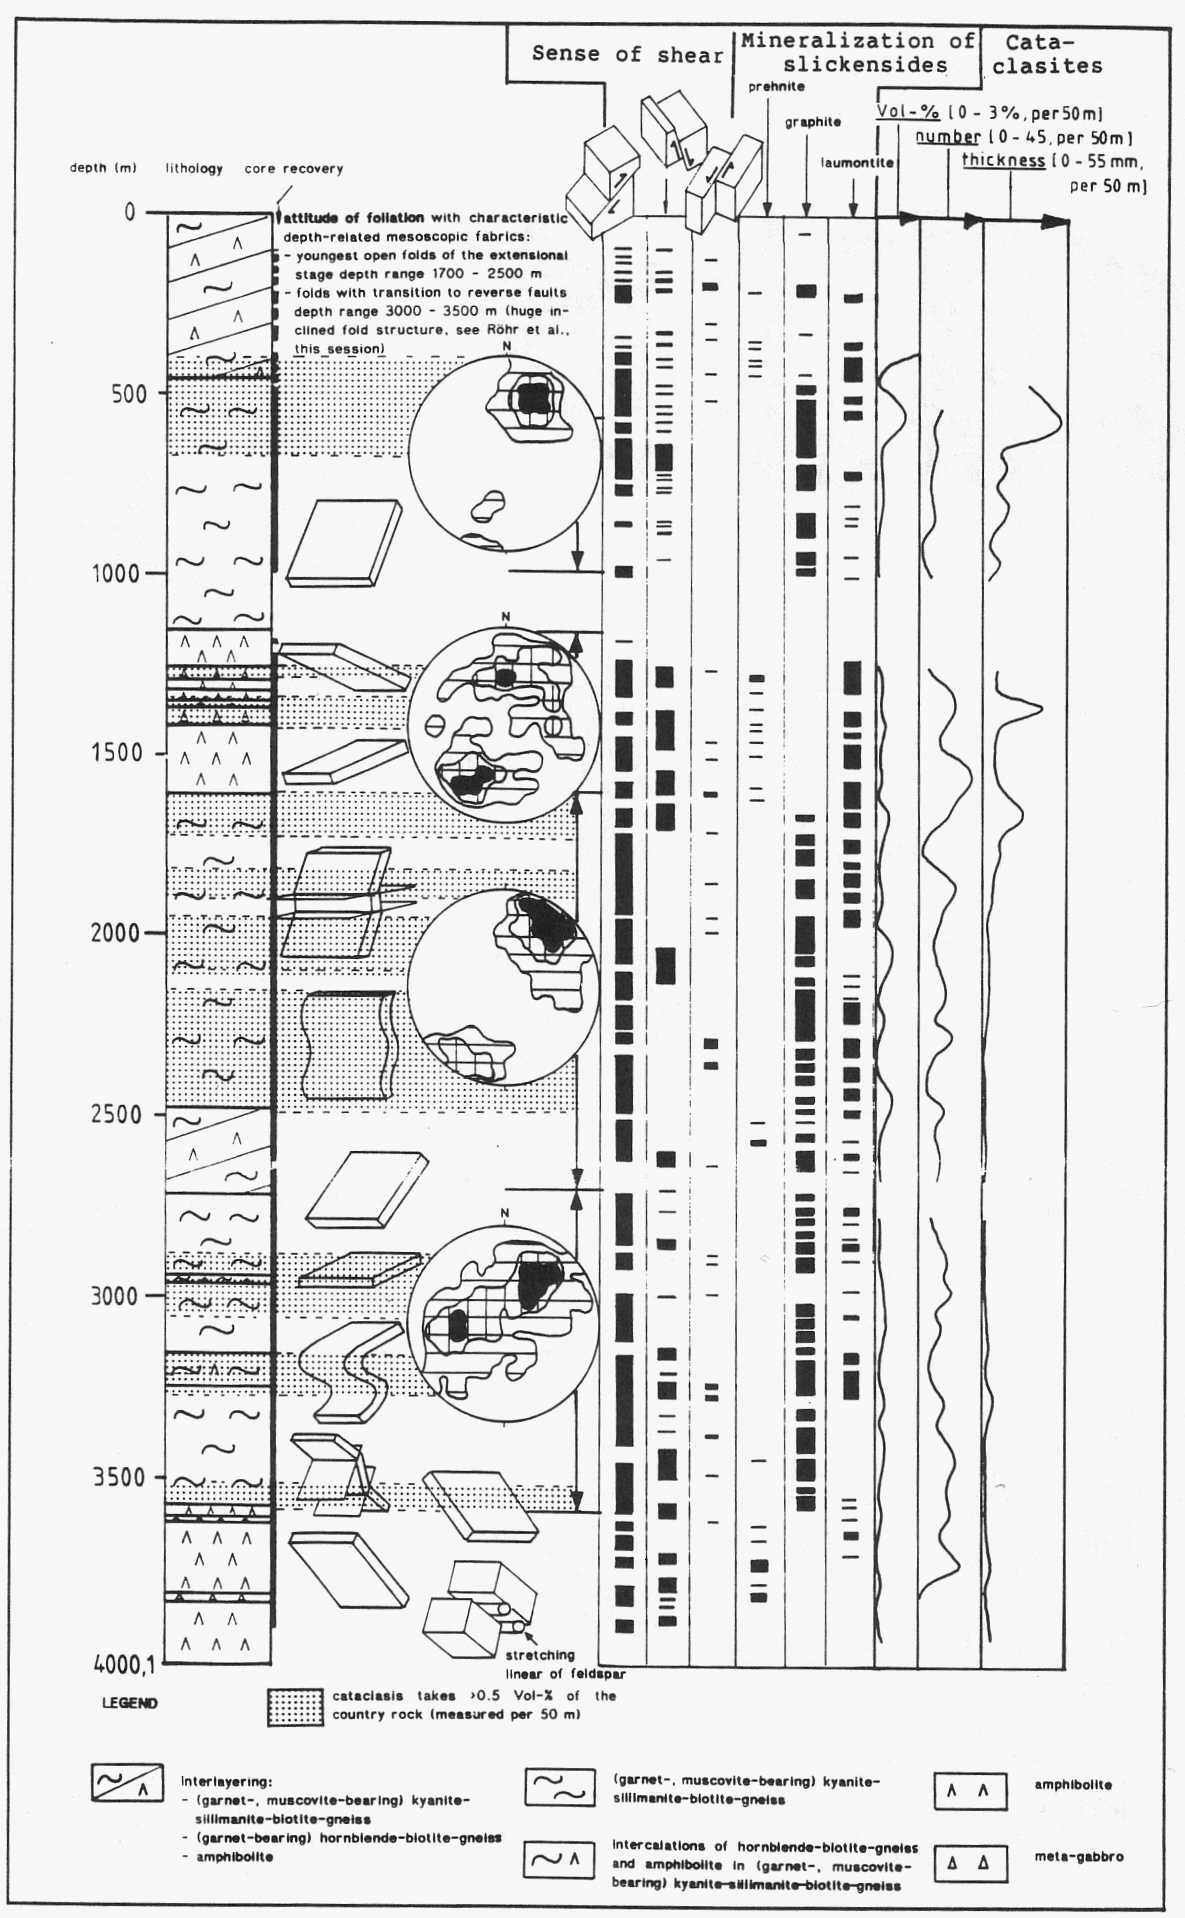 Synoptic diagram of lithology, attitude of foliation, sense of shear of faults, mineralization of slickensides,  number and thickness of cataclasites